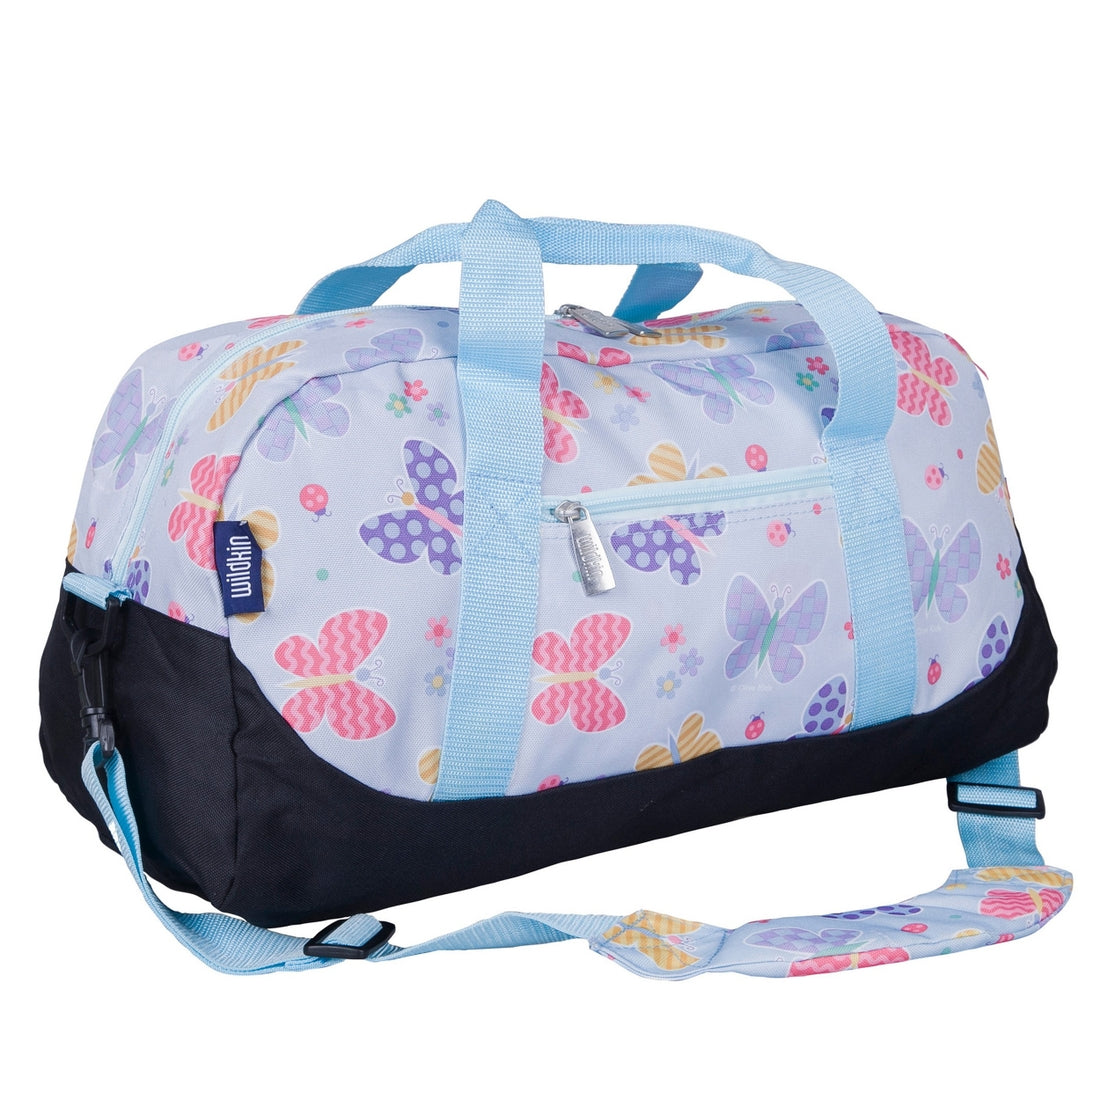 Small Duffle Dance Bags - Assorted Prints